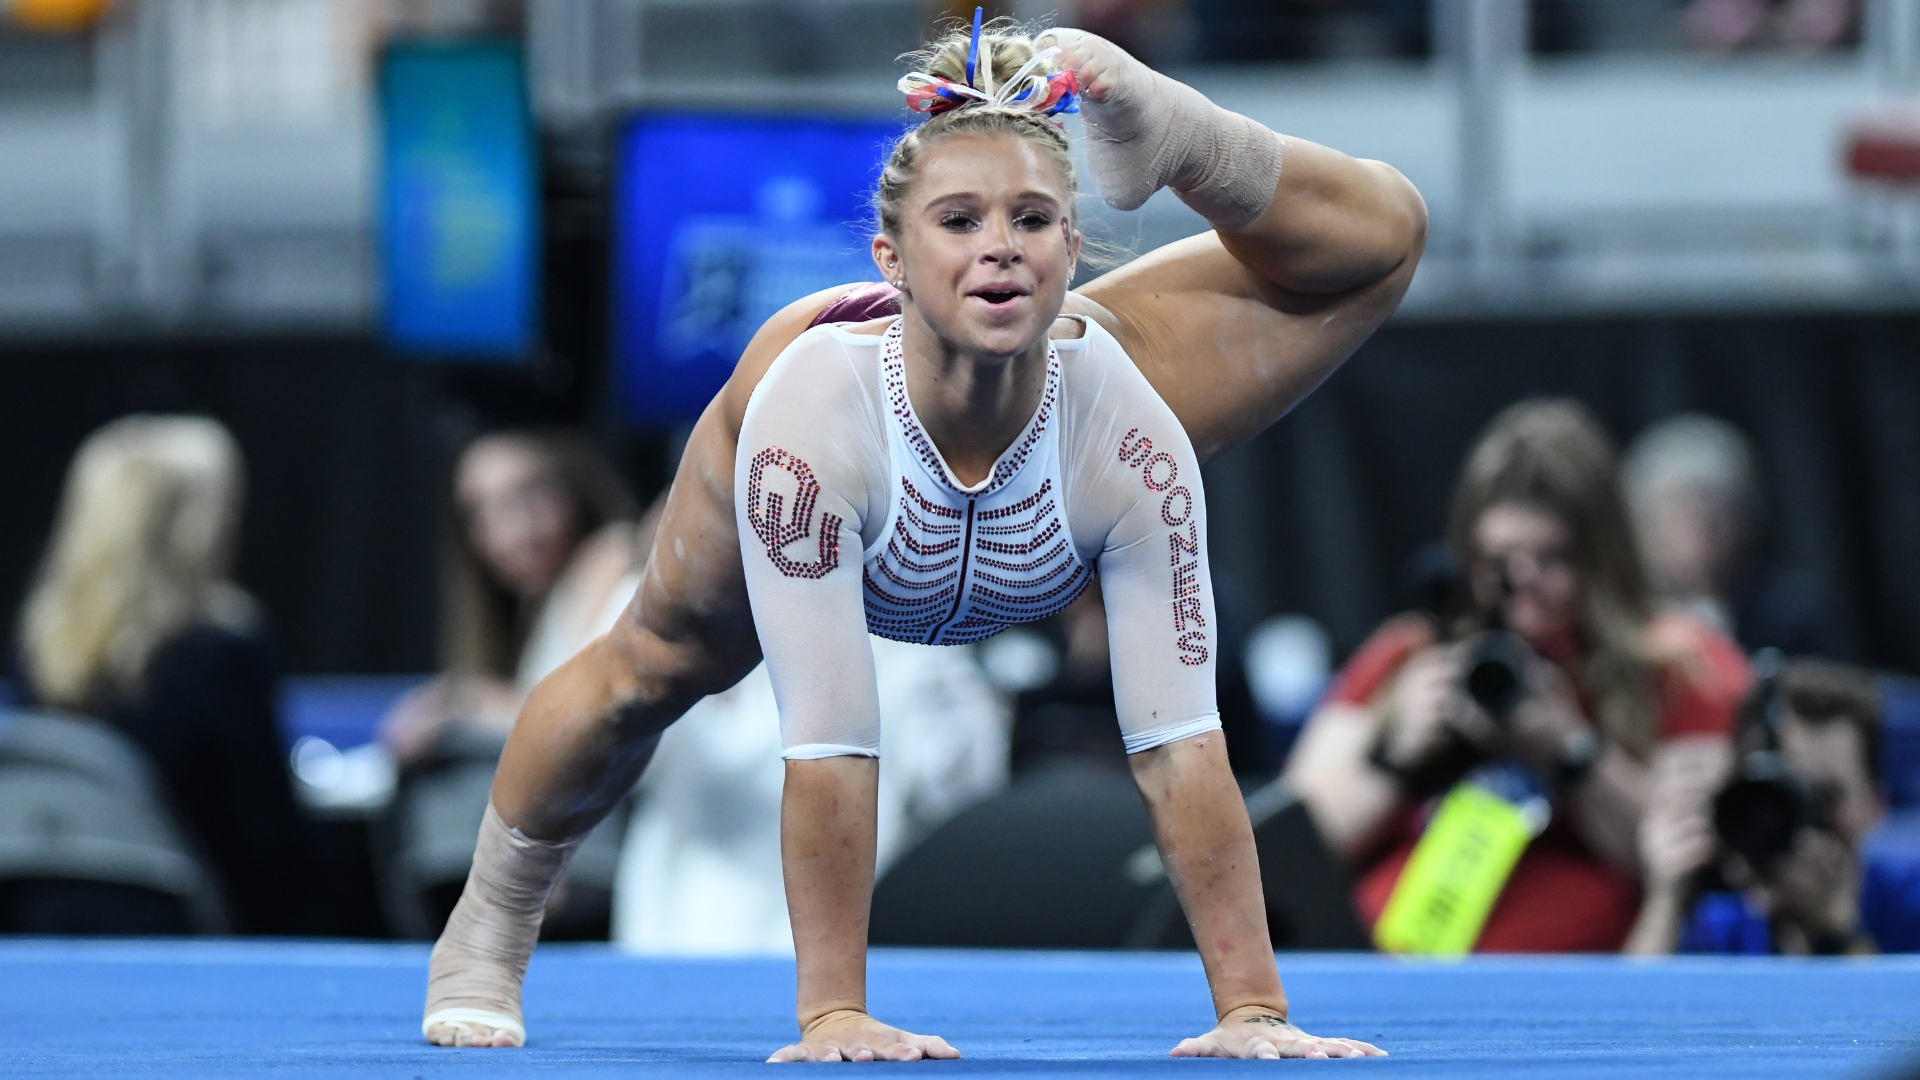 2023-ncaa-women-s-gymnastics-preview-oklahoma-once-again-the-team-to-beat-as-florida-continues-to-challenge-gymnastics-now